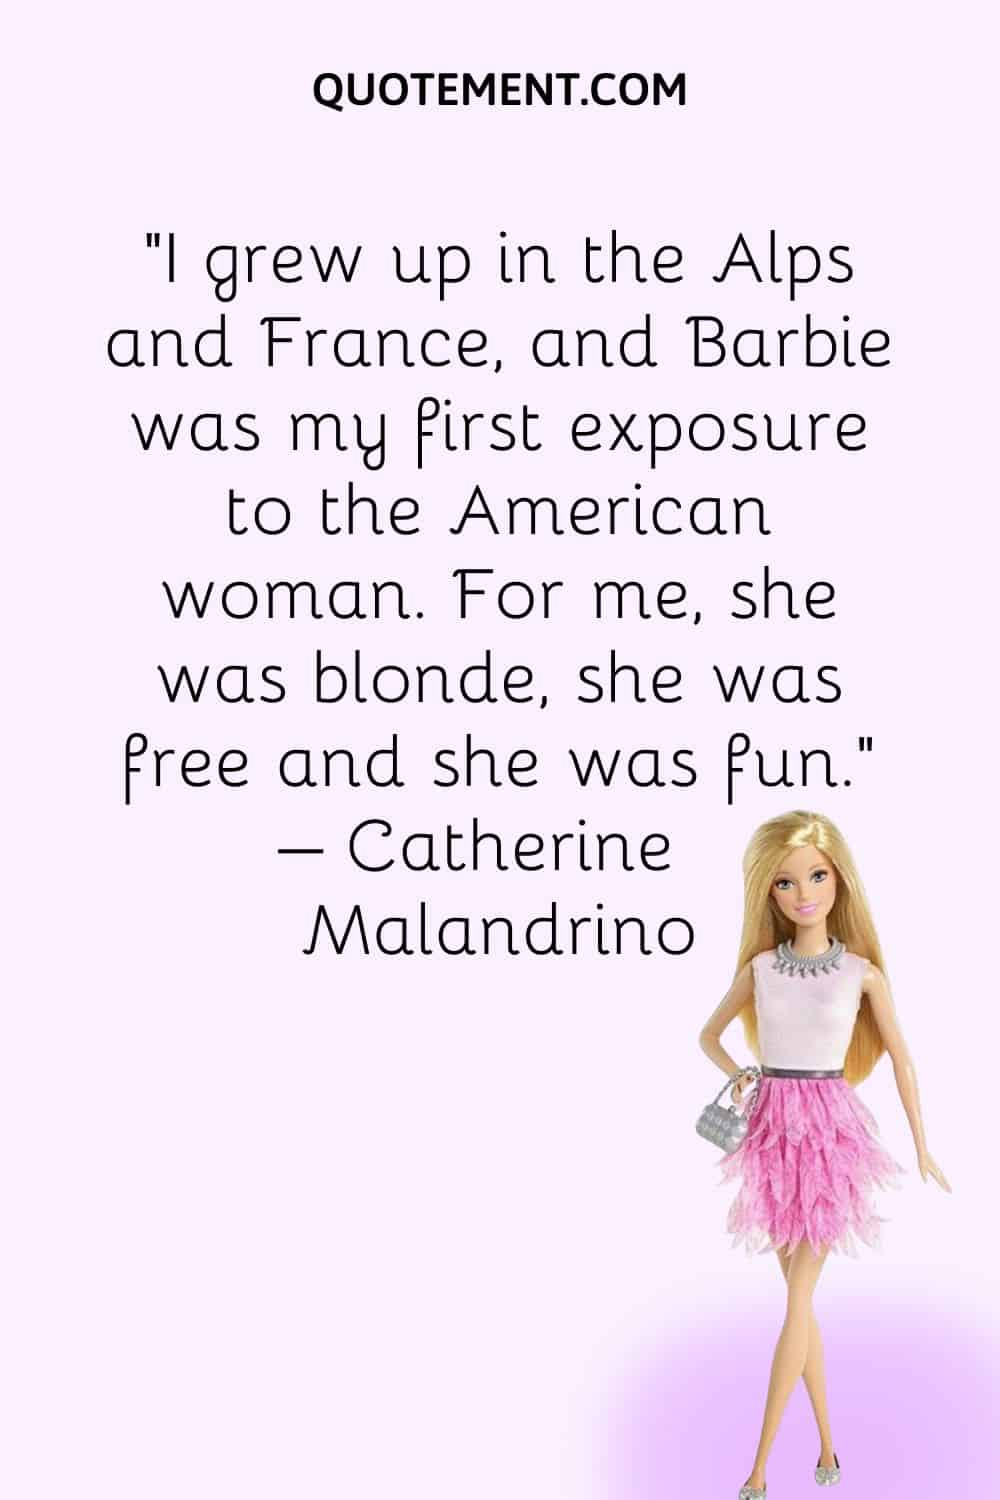 I grew up in the Alps and France, and Barbie was my first exposure to the American woman